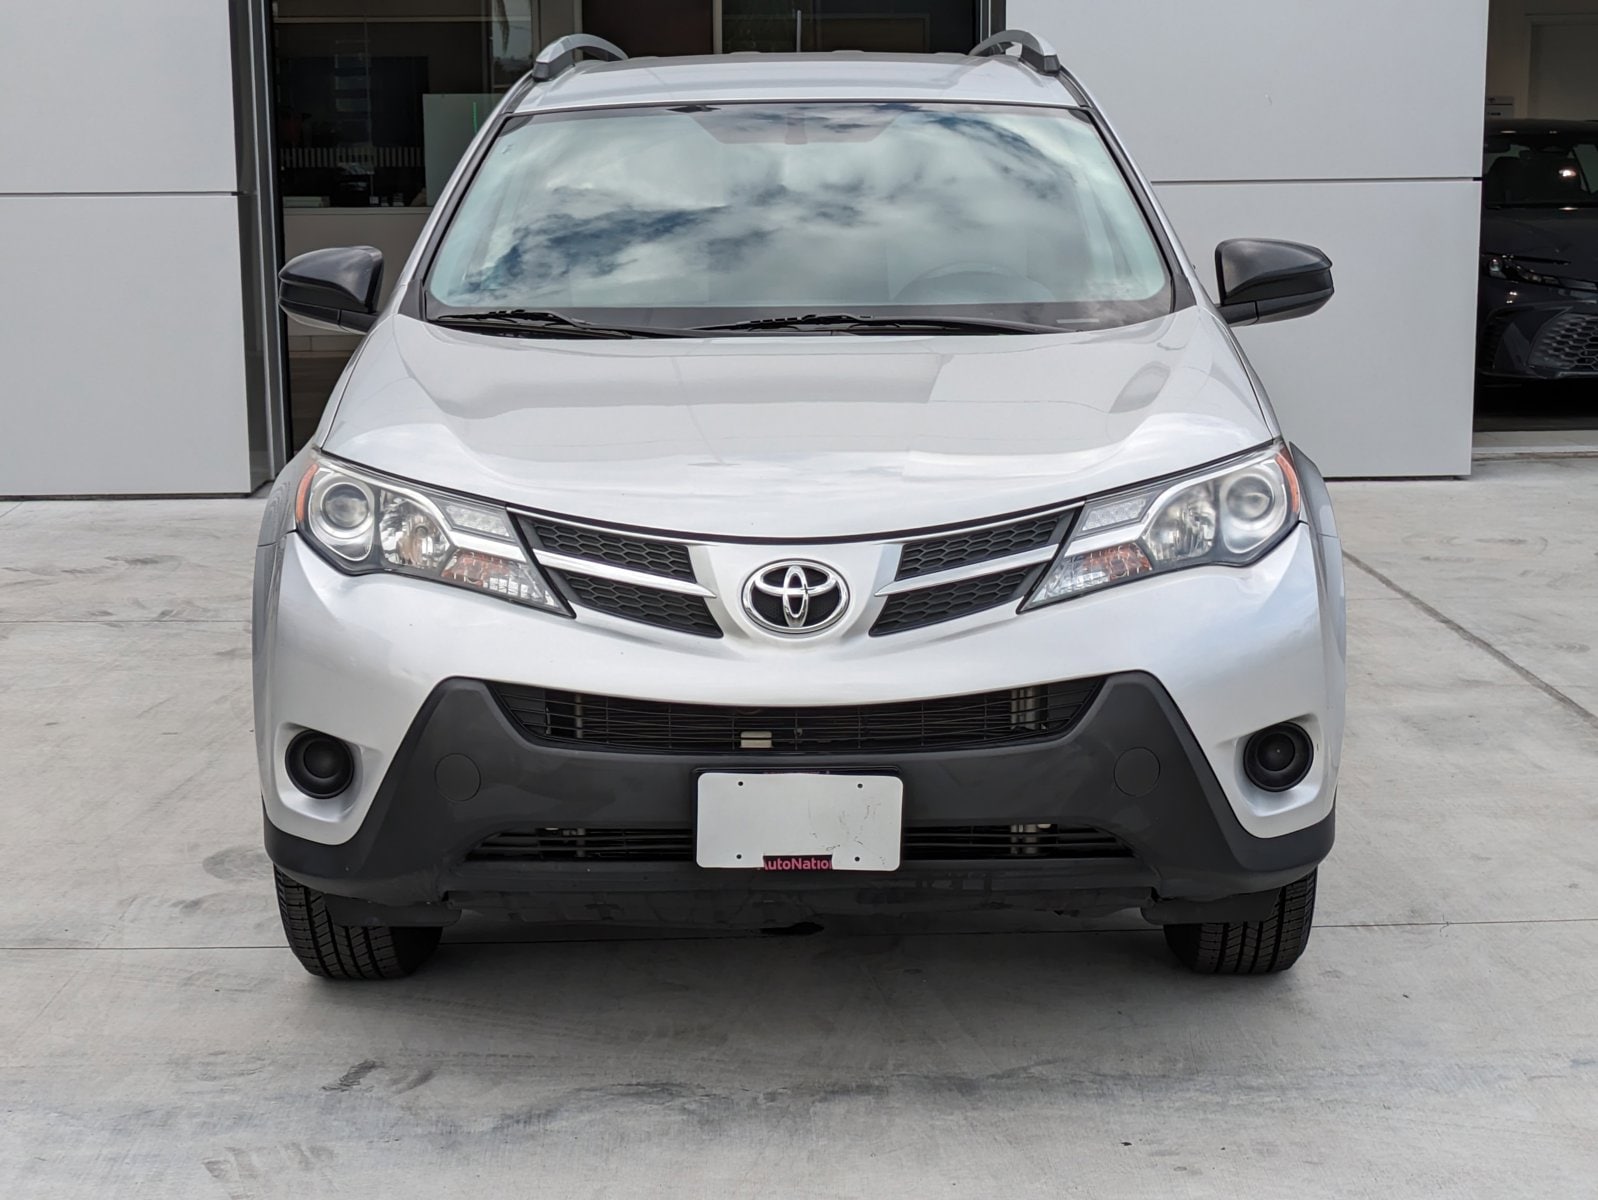 Used 2013 Toyota RAV4 LE with VIN 2T3ZFREV1DW060336 for sale in Buena Park, CA